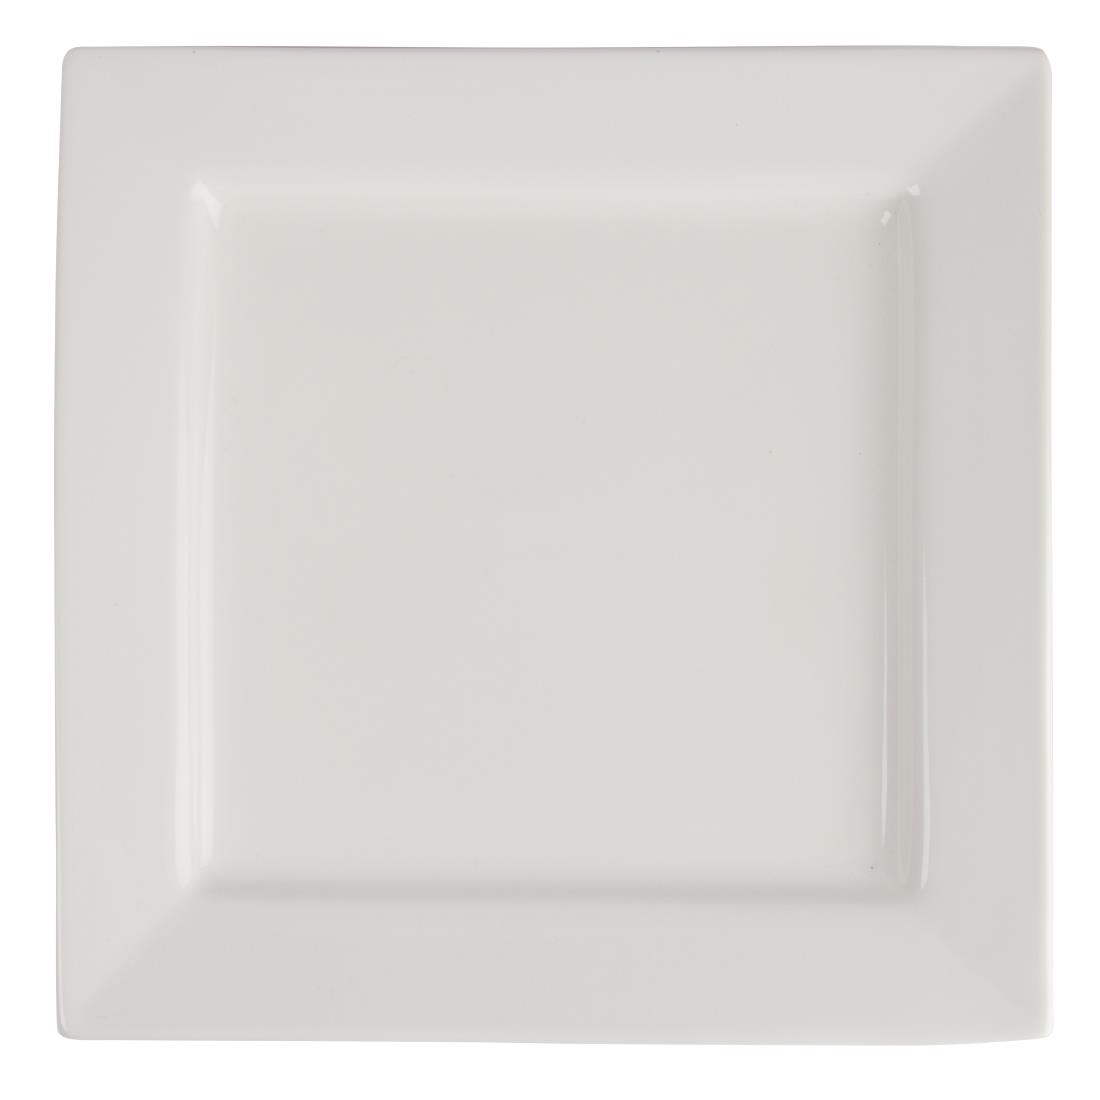 Olympia Lumina Square Plates 233mm (Pack of 4)